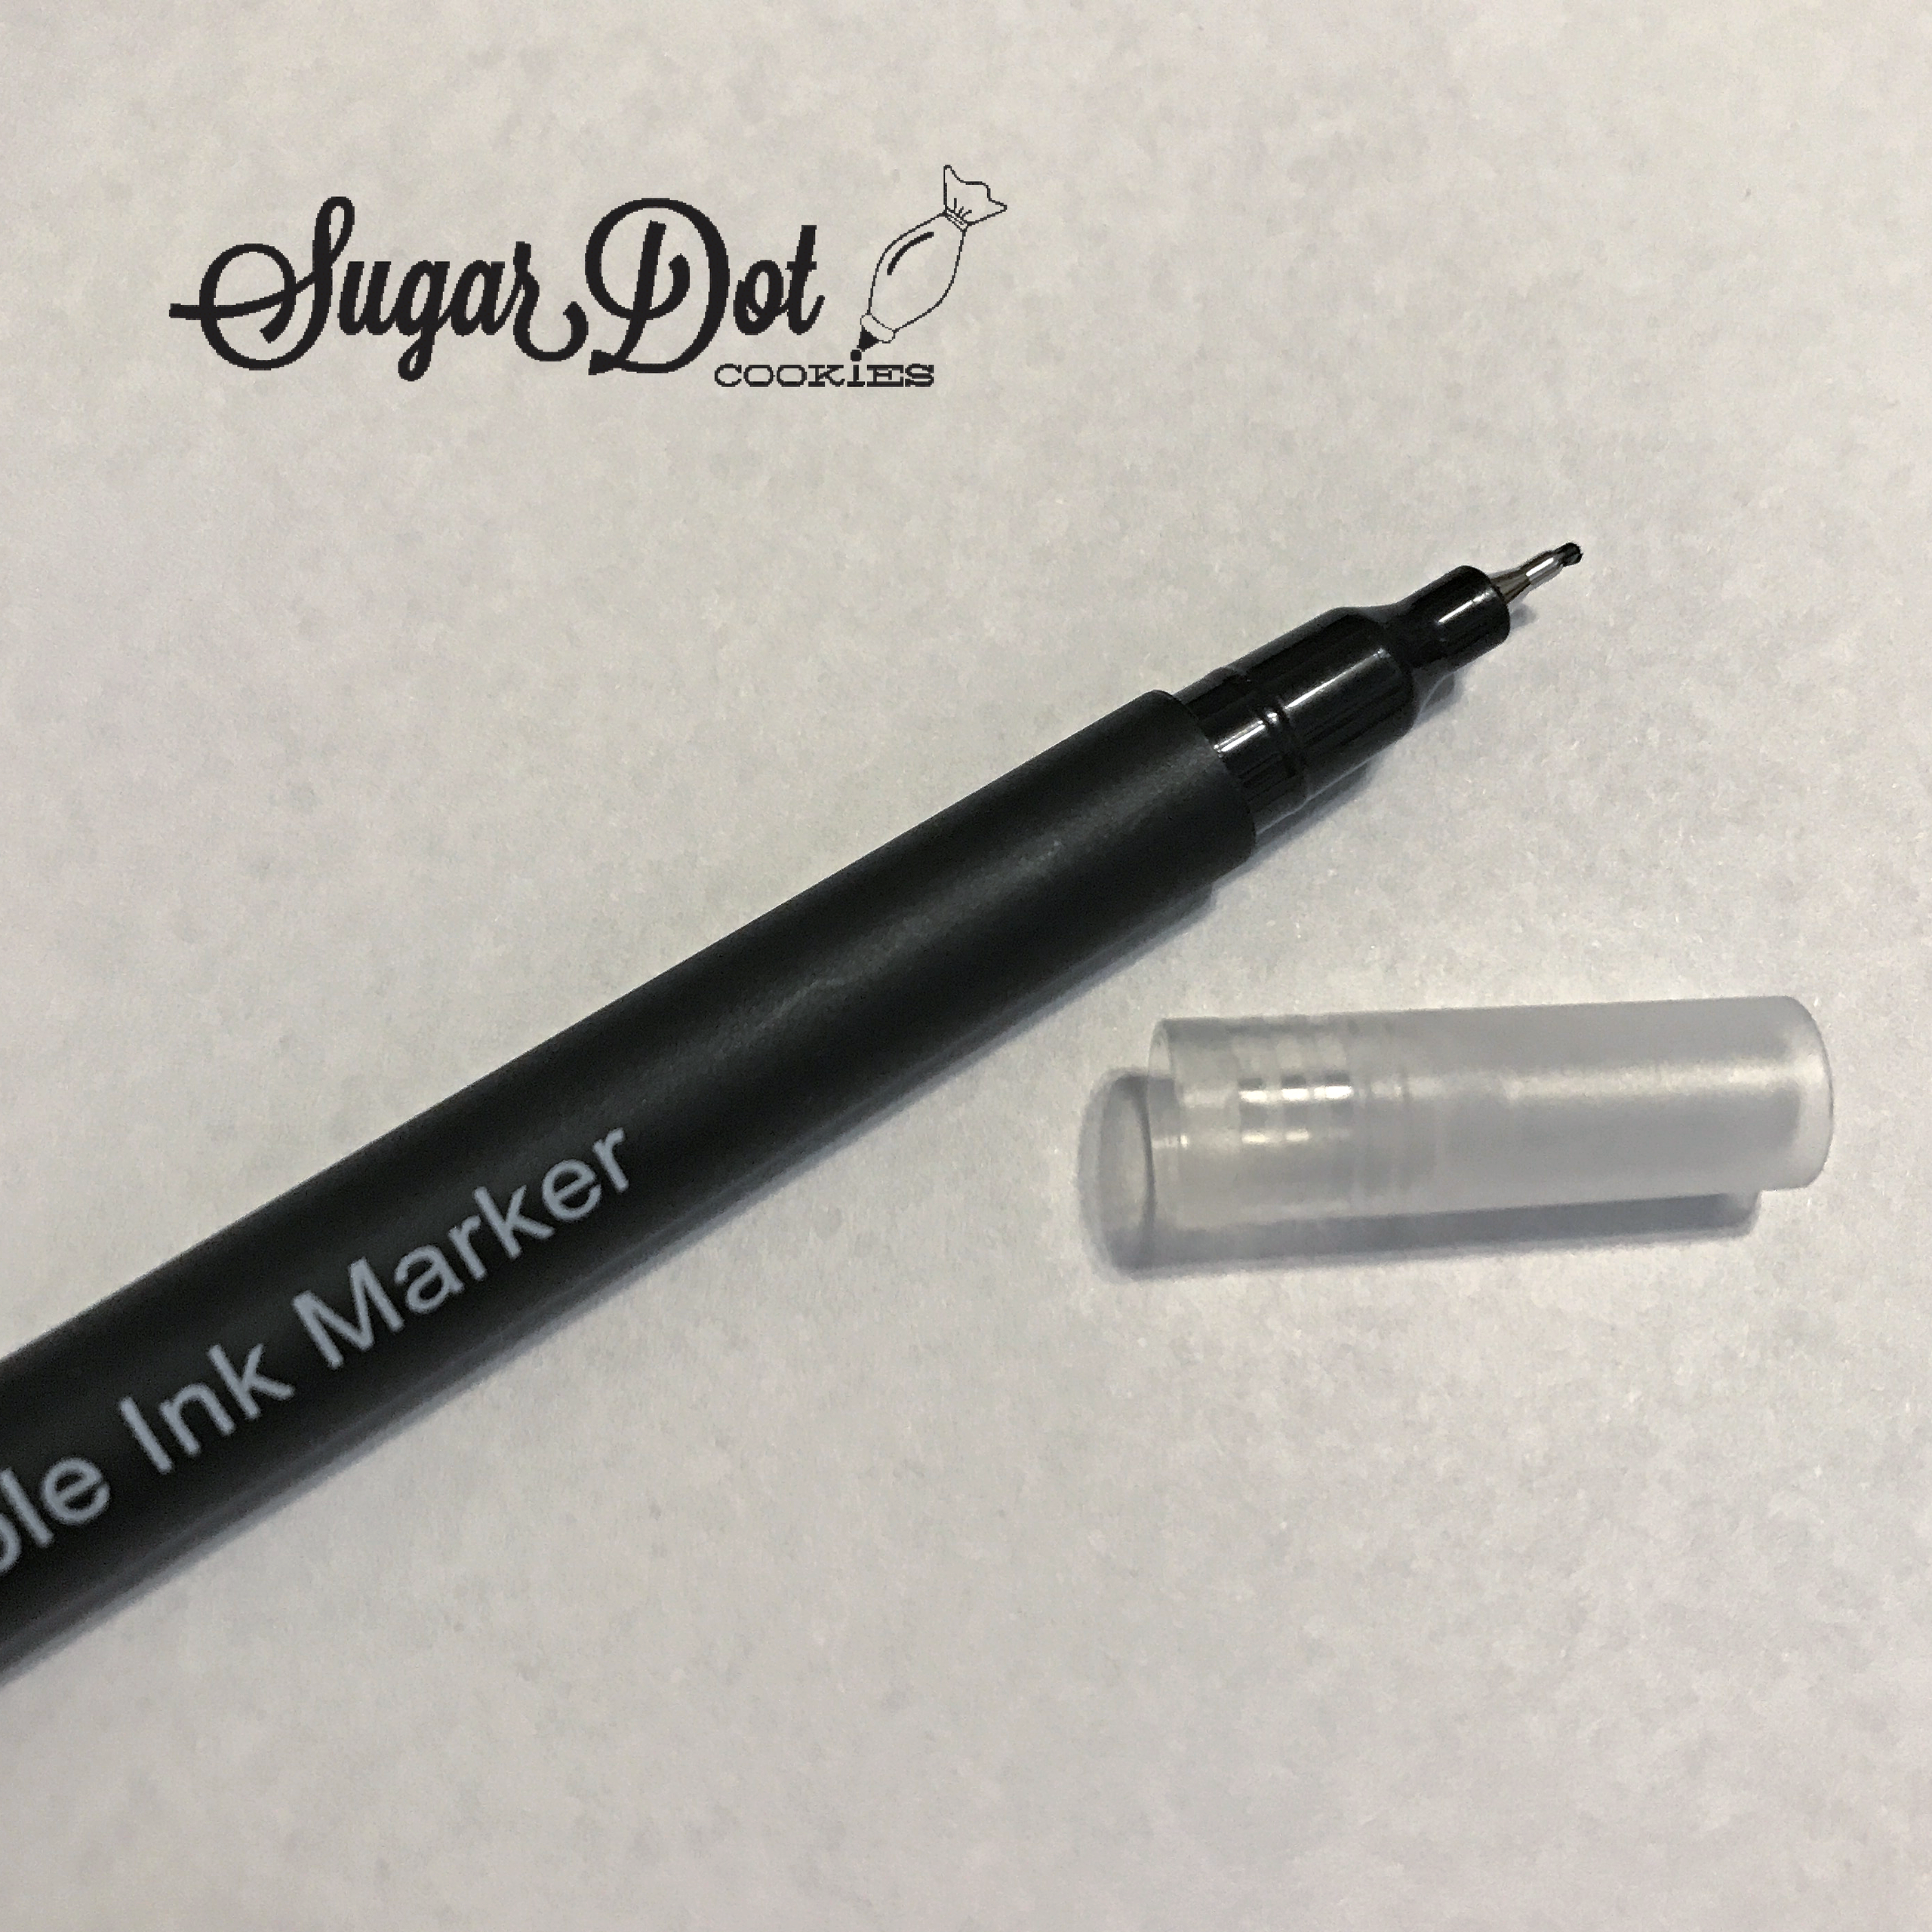 Ultra Fine Black Edible Dual Tip Markers for cookies and cakes